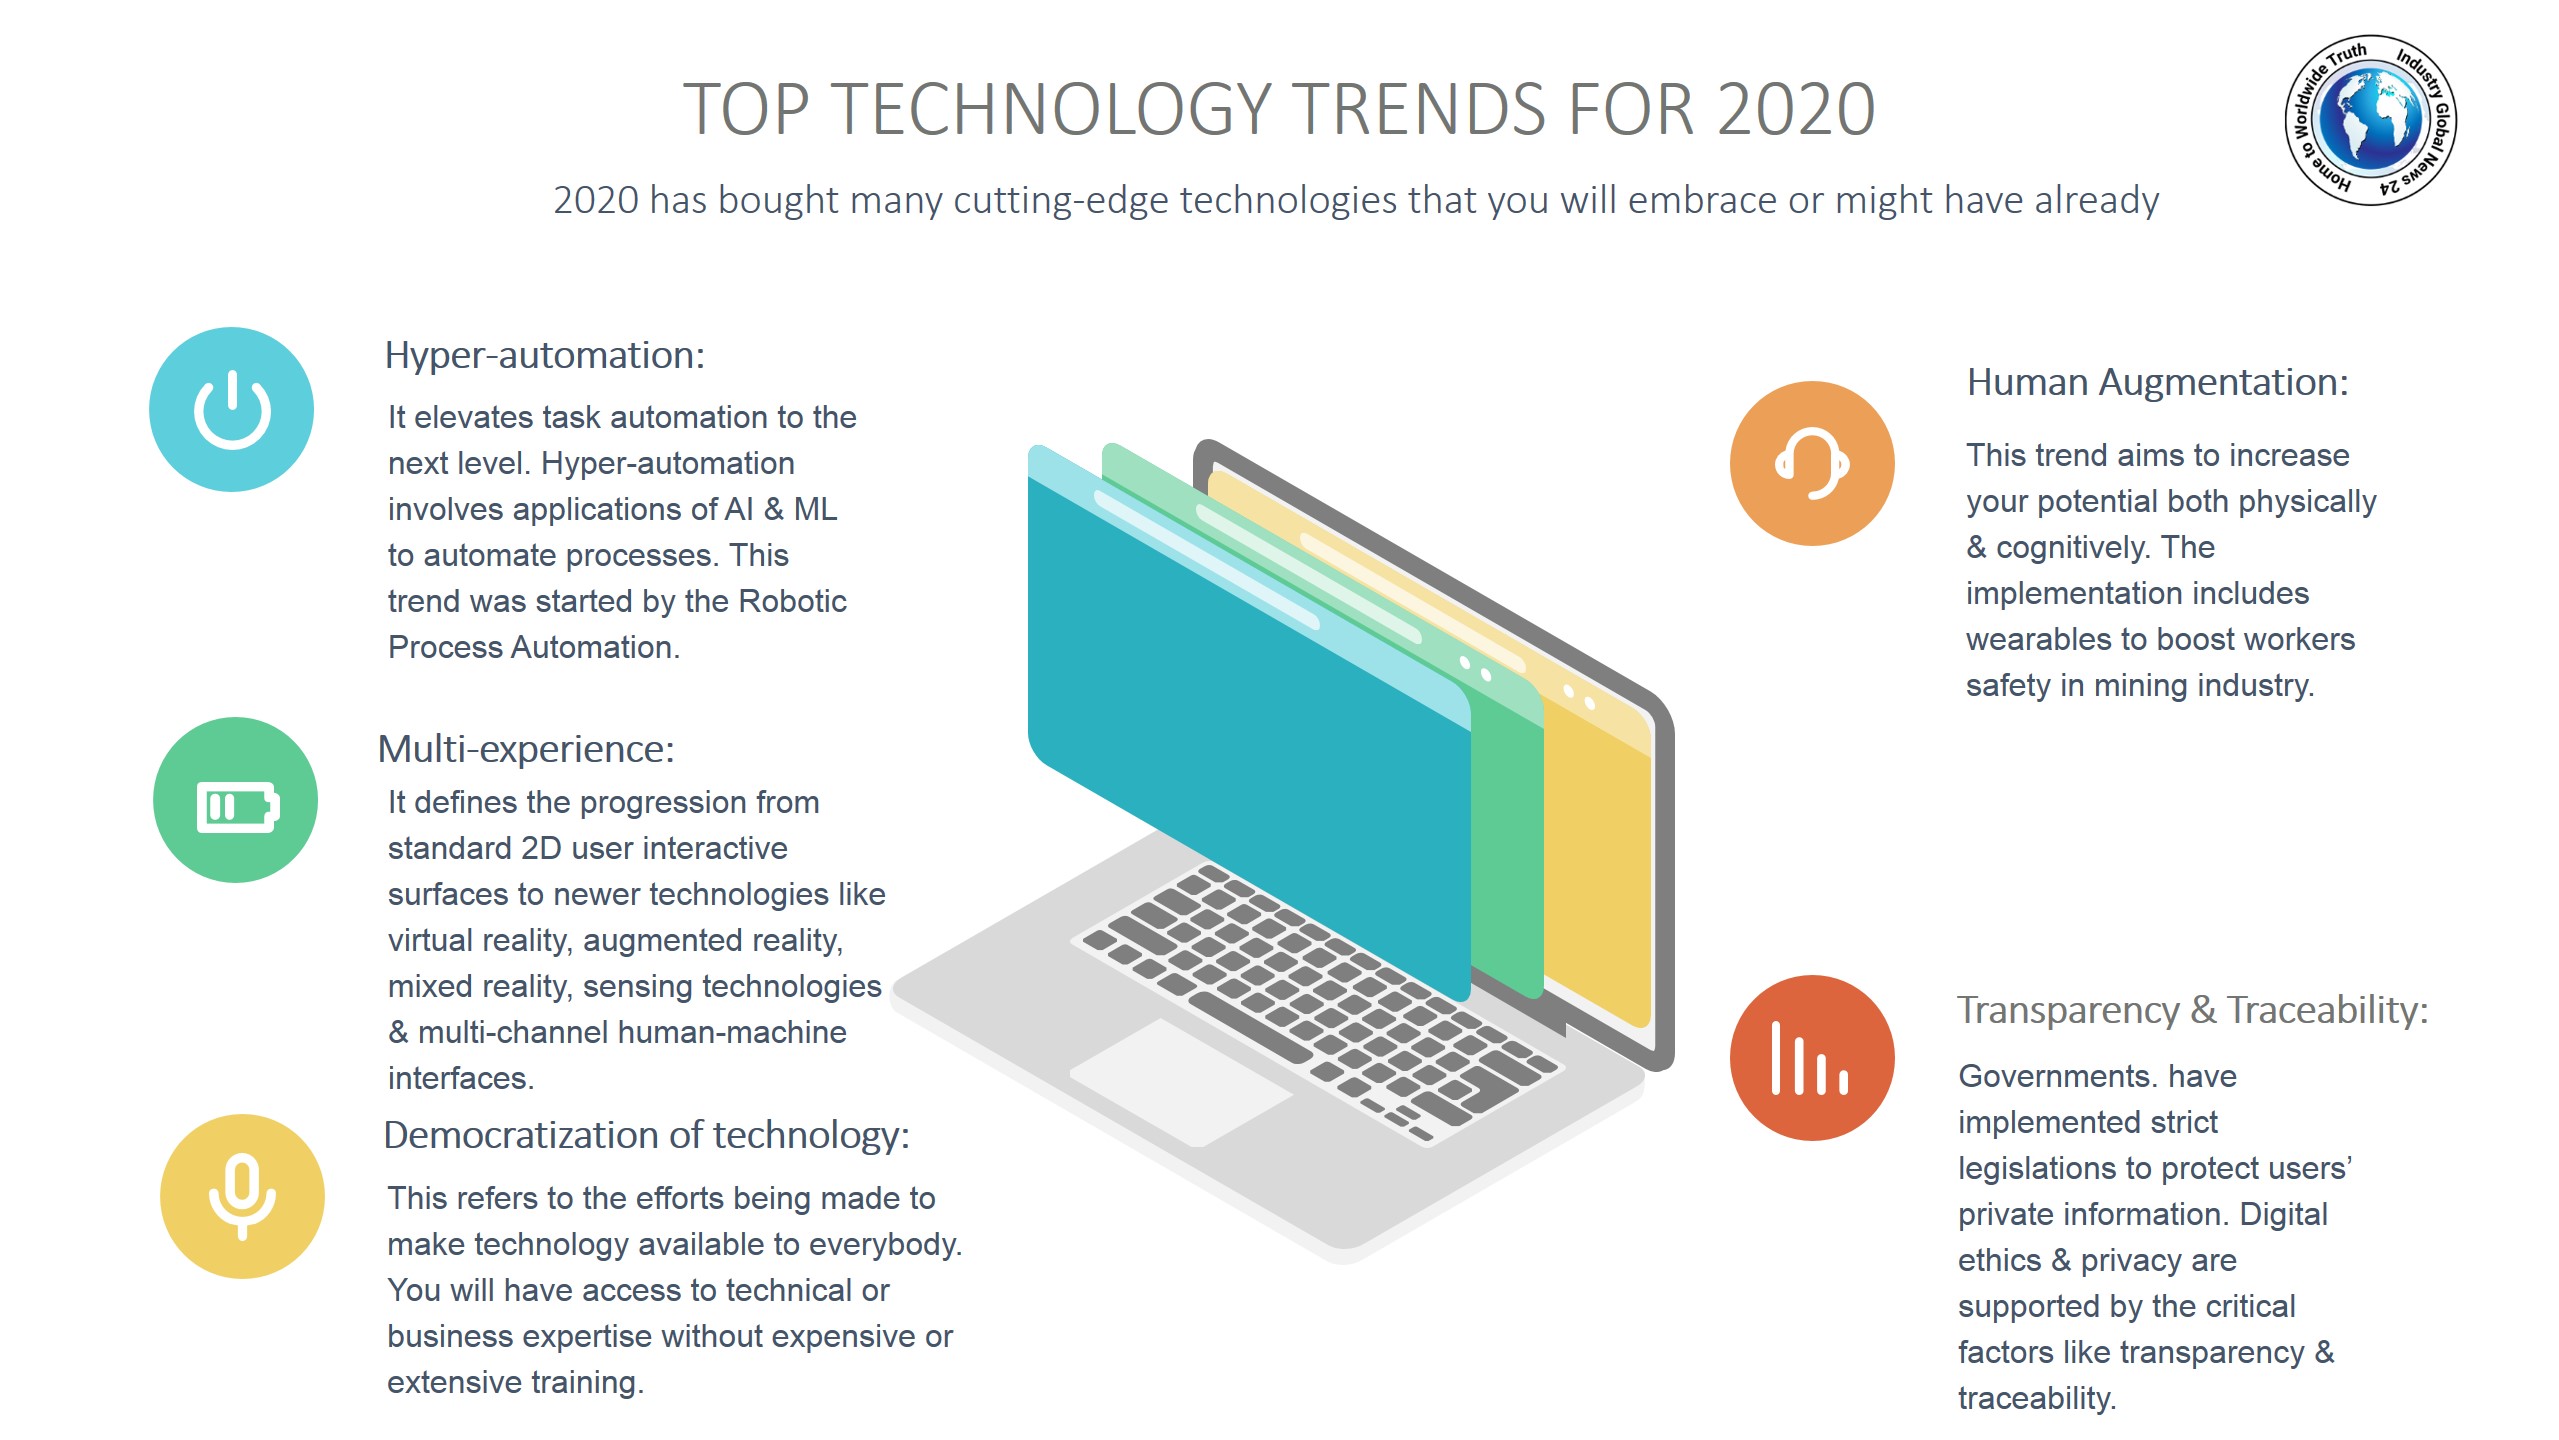 Top technology trends for 2020